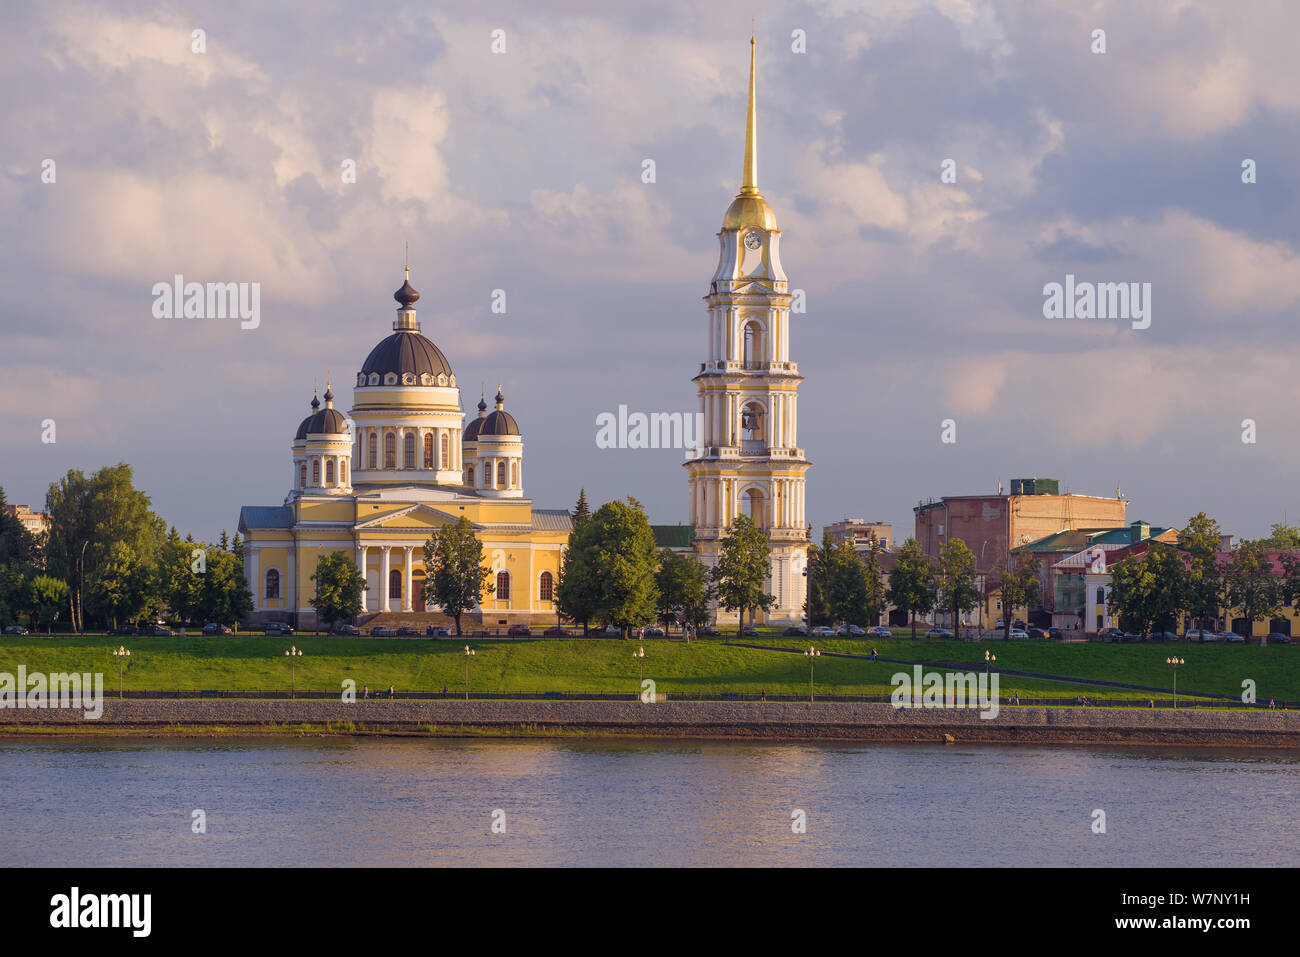 View of the Transfiguration Cathedral on the banks of the Volga river on  warm July evening. Rybinsk, Russia Stock Photo